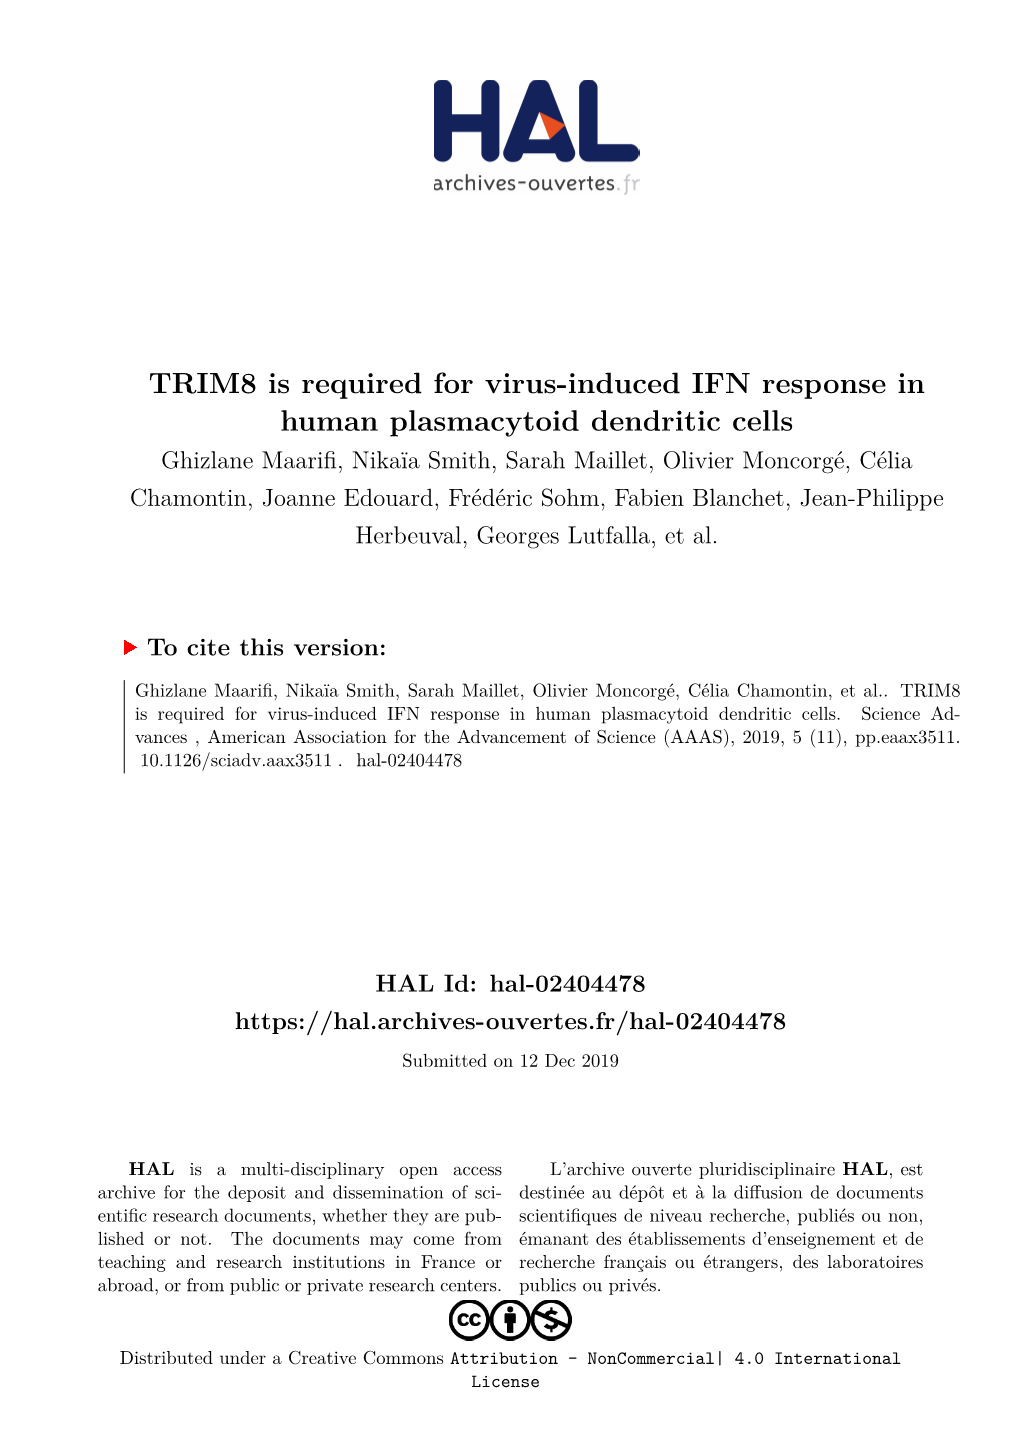 TRIM8 Is Required for Virus-Induced IFN Response in Human